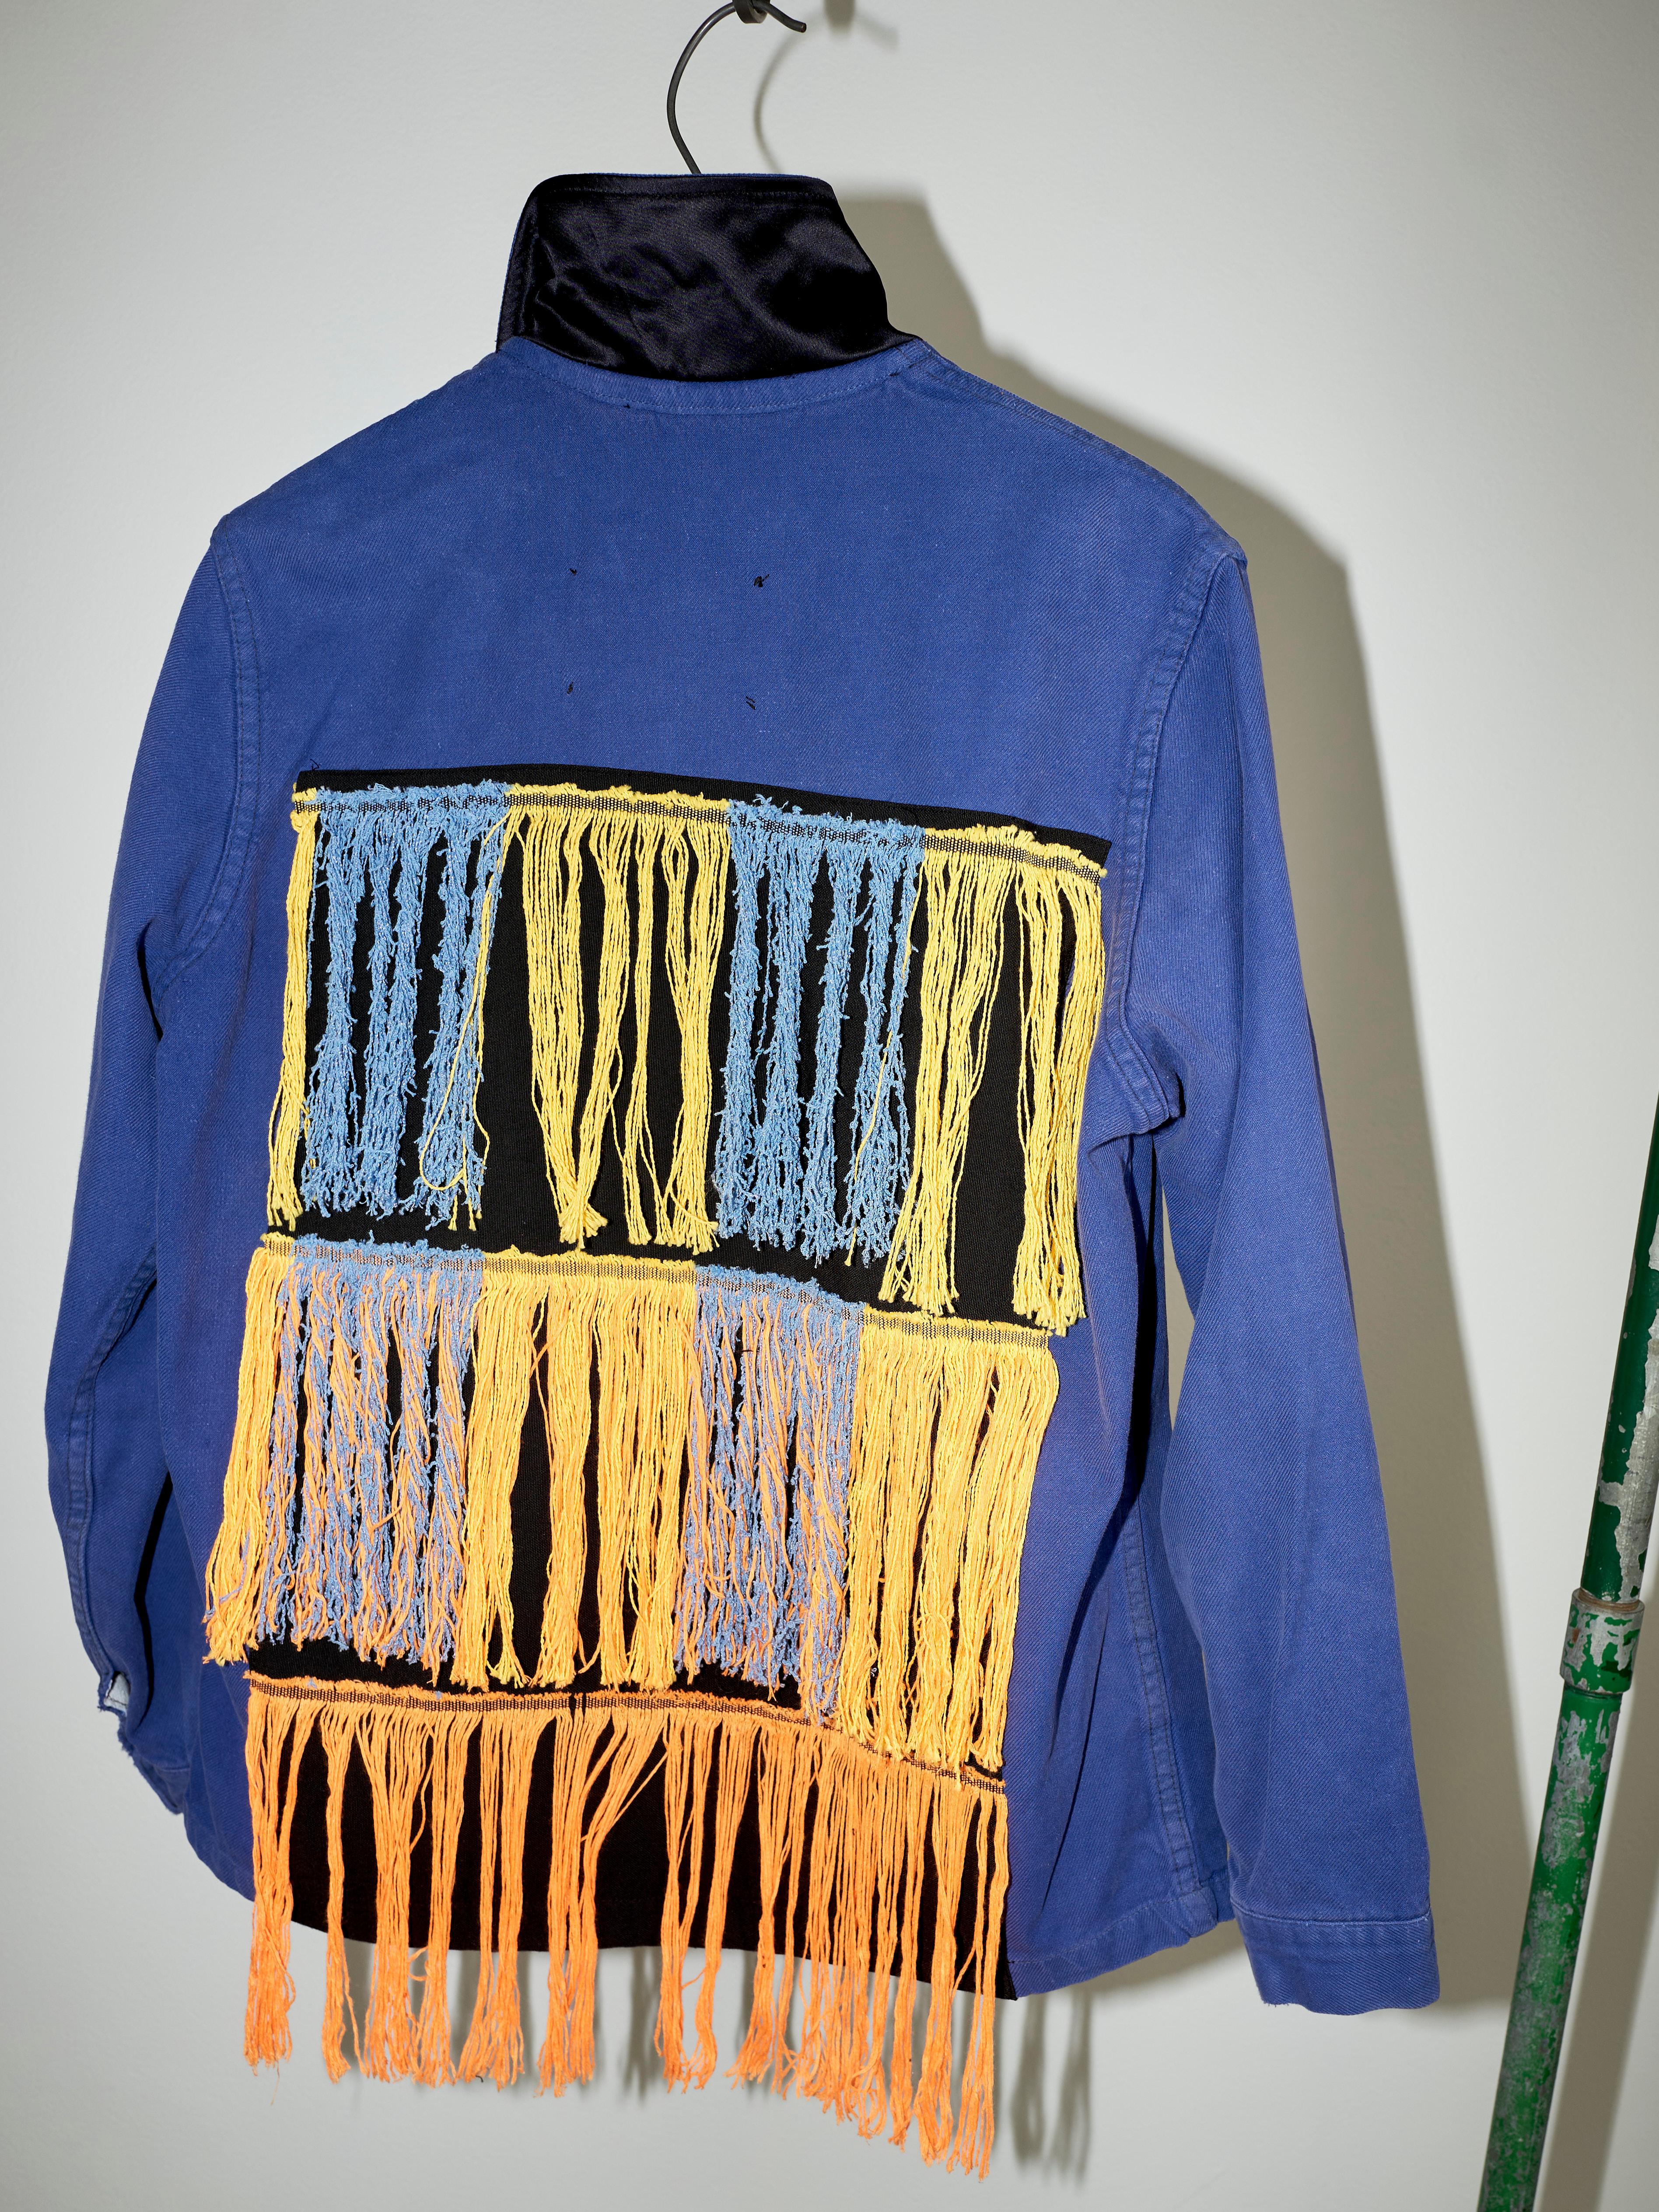 Fringe Yellow Orange Blue Jacket Work France One of a Kind Small For Sale 1